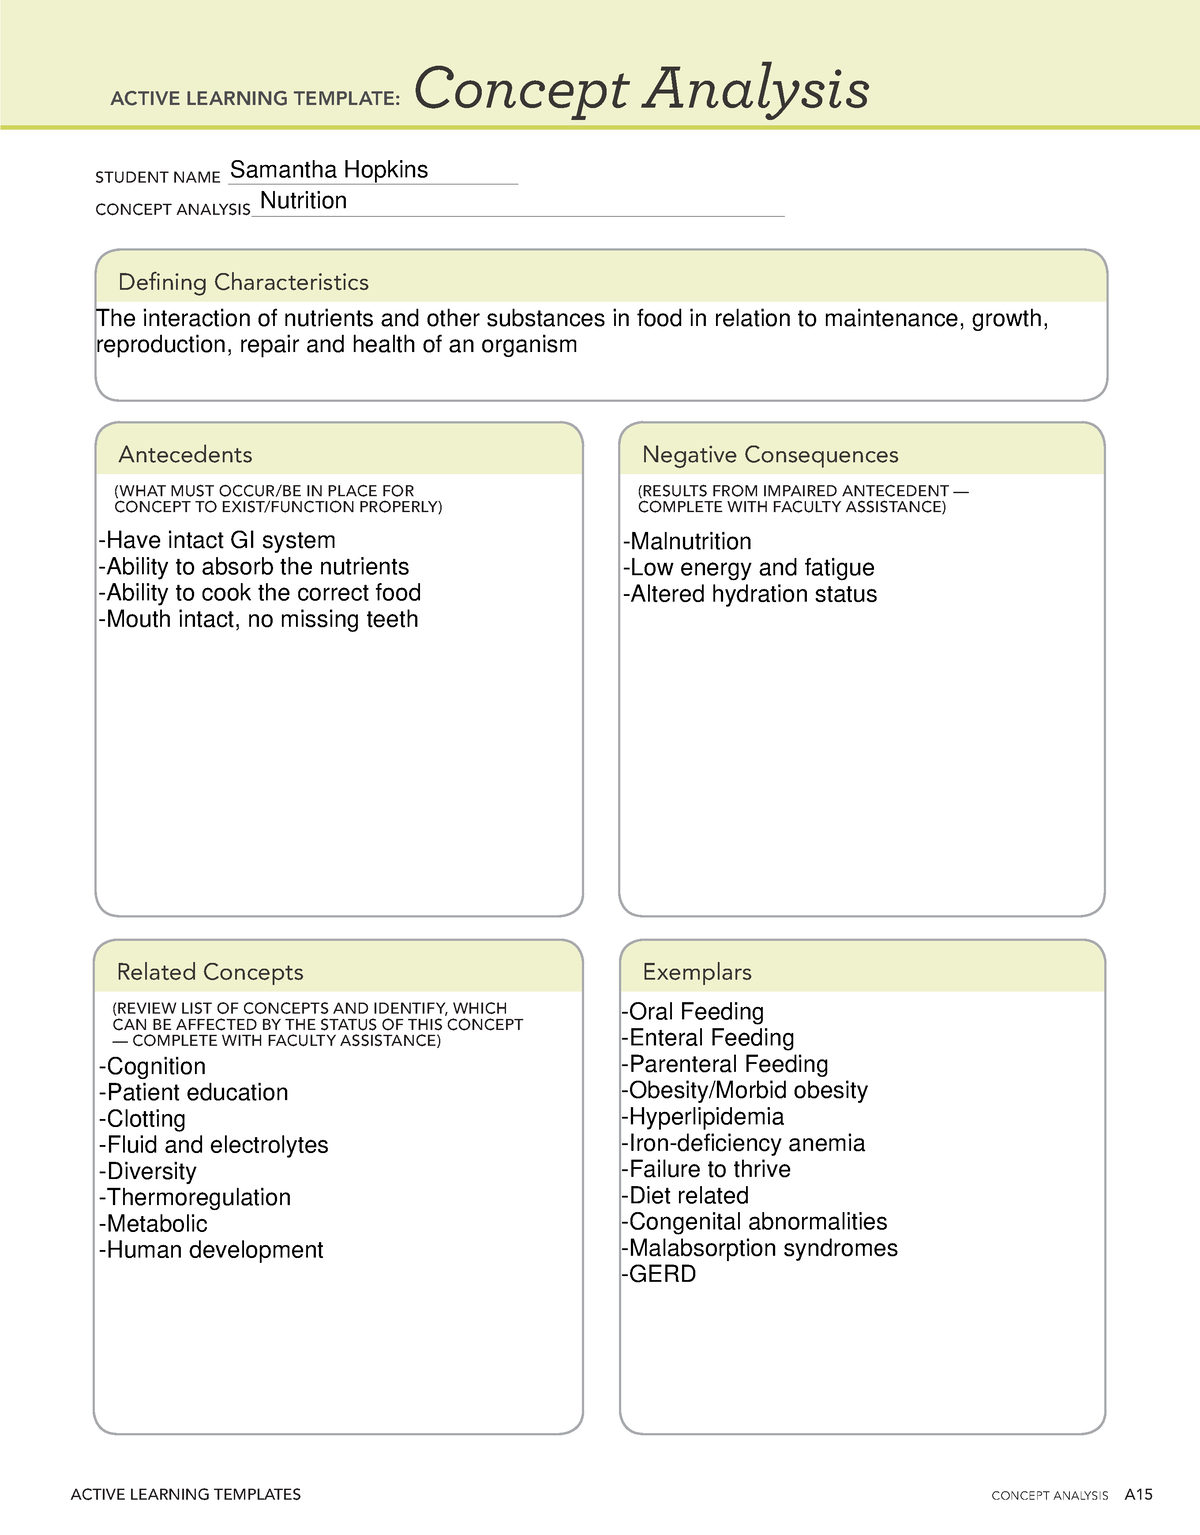 concept-analysis-2-final-active-learning-templates-concept-analysis-a